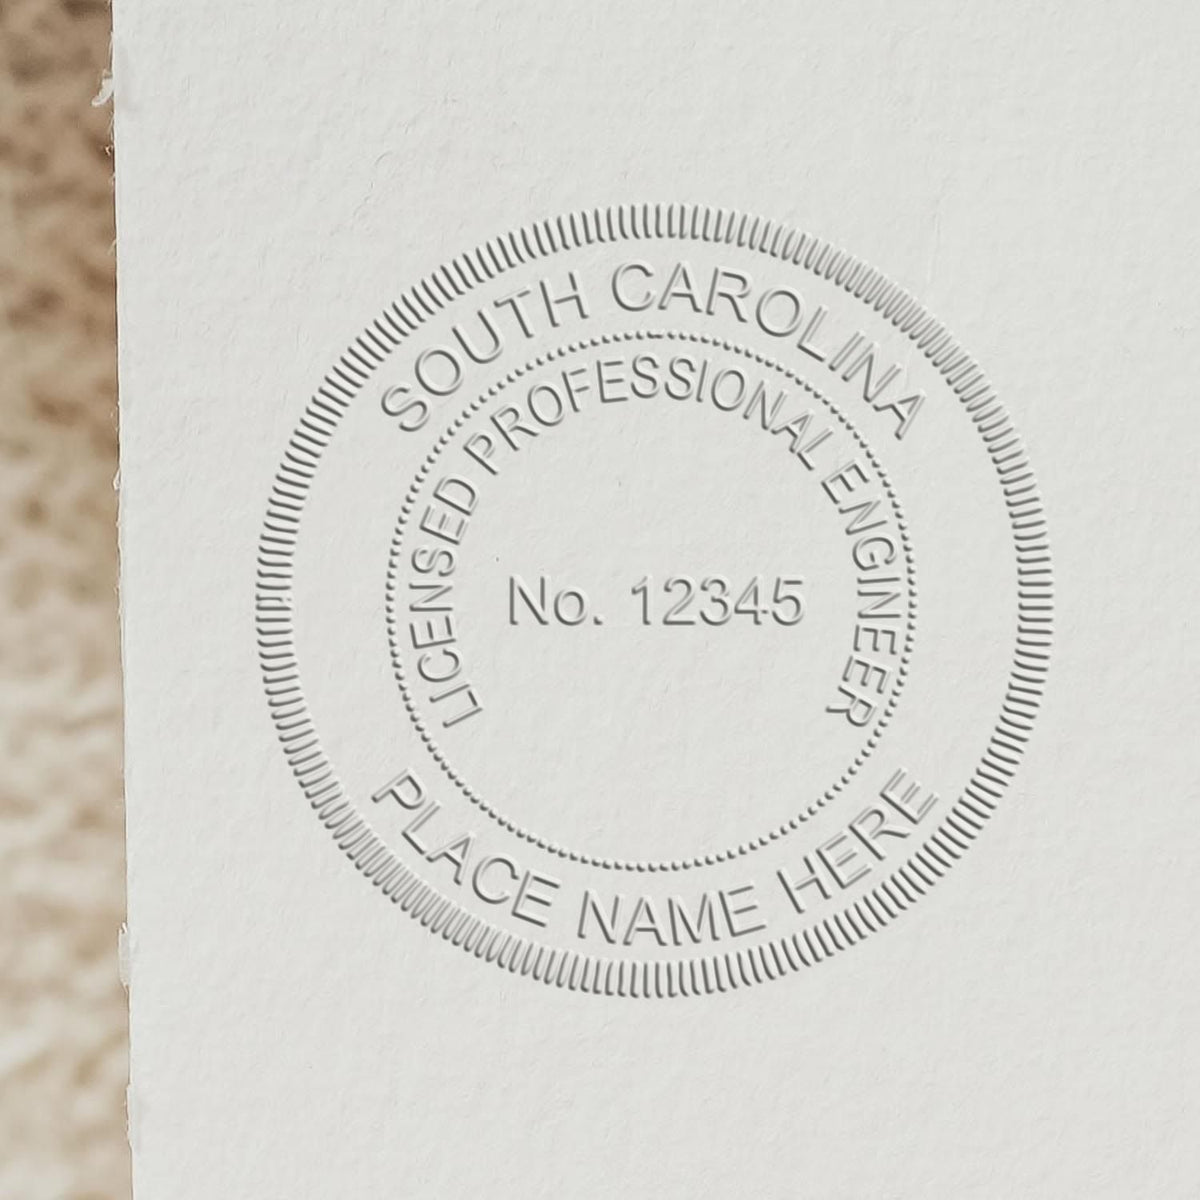 A photograph of the Soft South Carolina Professional Engineer Seal stamp impression reveals a vivid, professional image of the on paper.